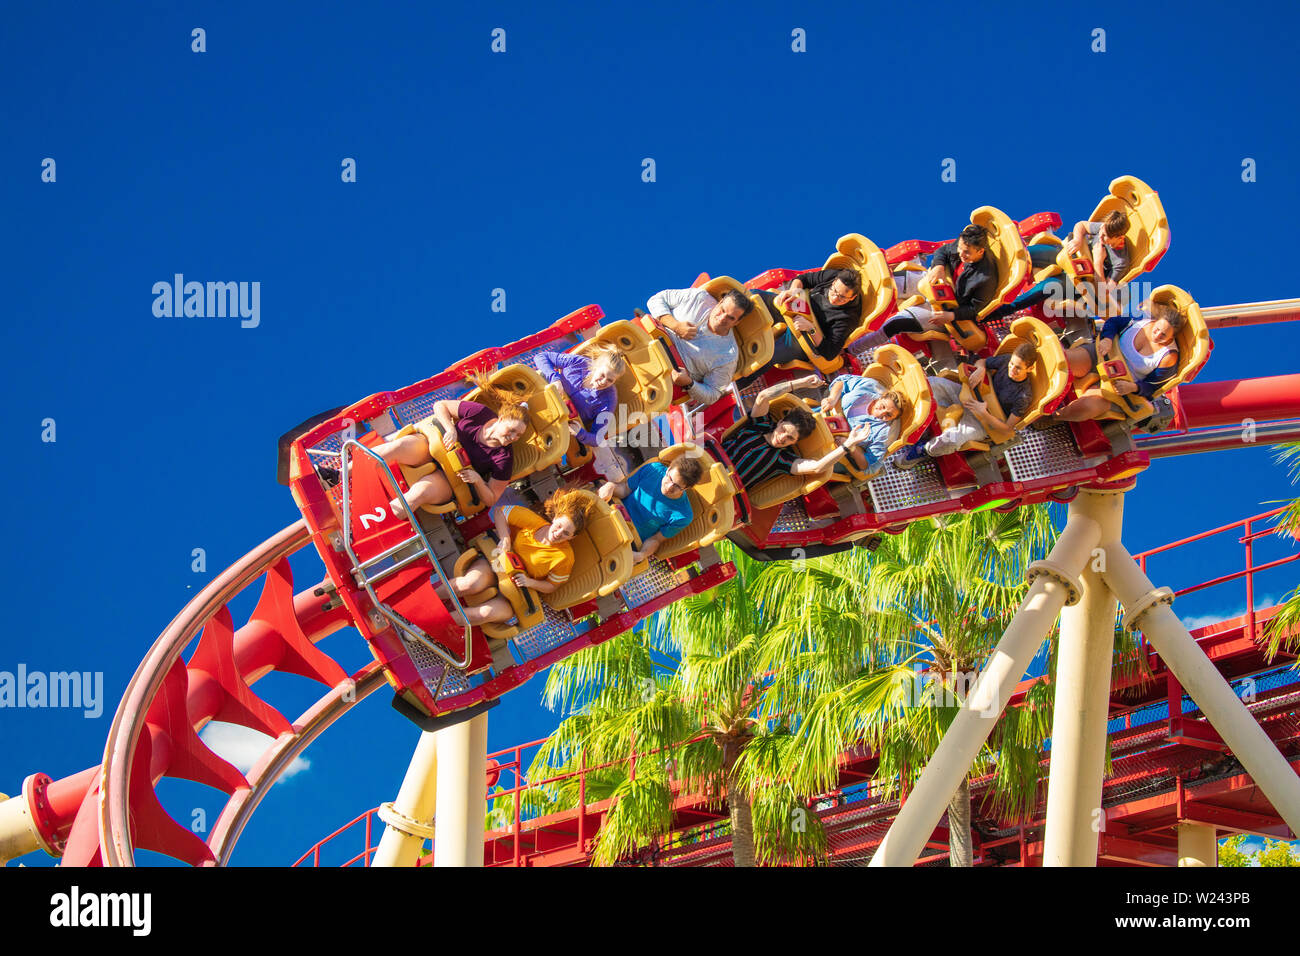 Hollywood Rip Ride Rockit. Rollercoaster. Banque D'Images